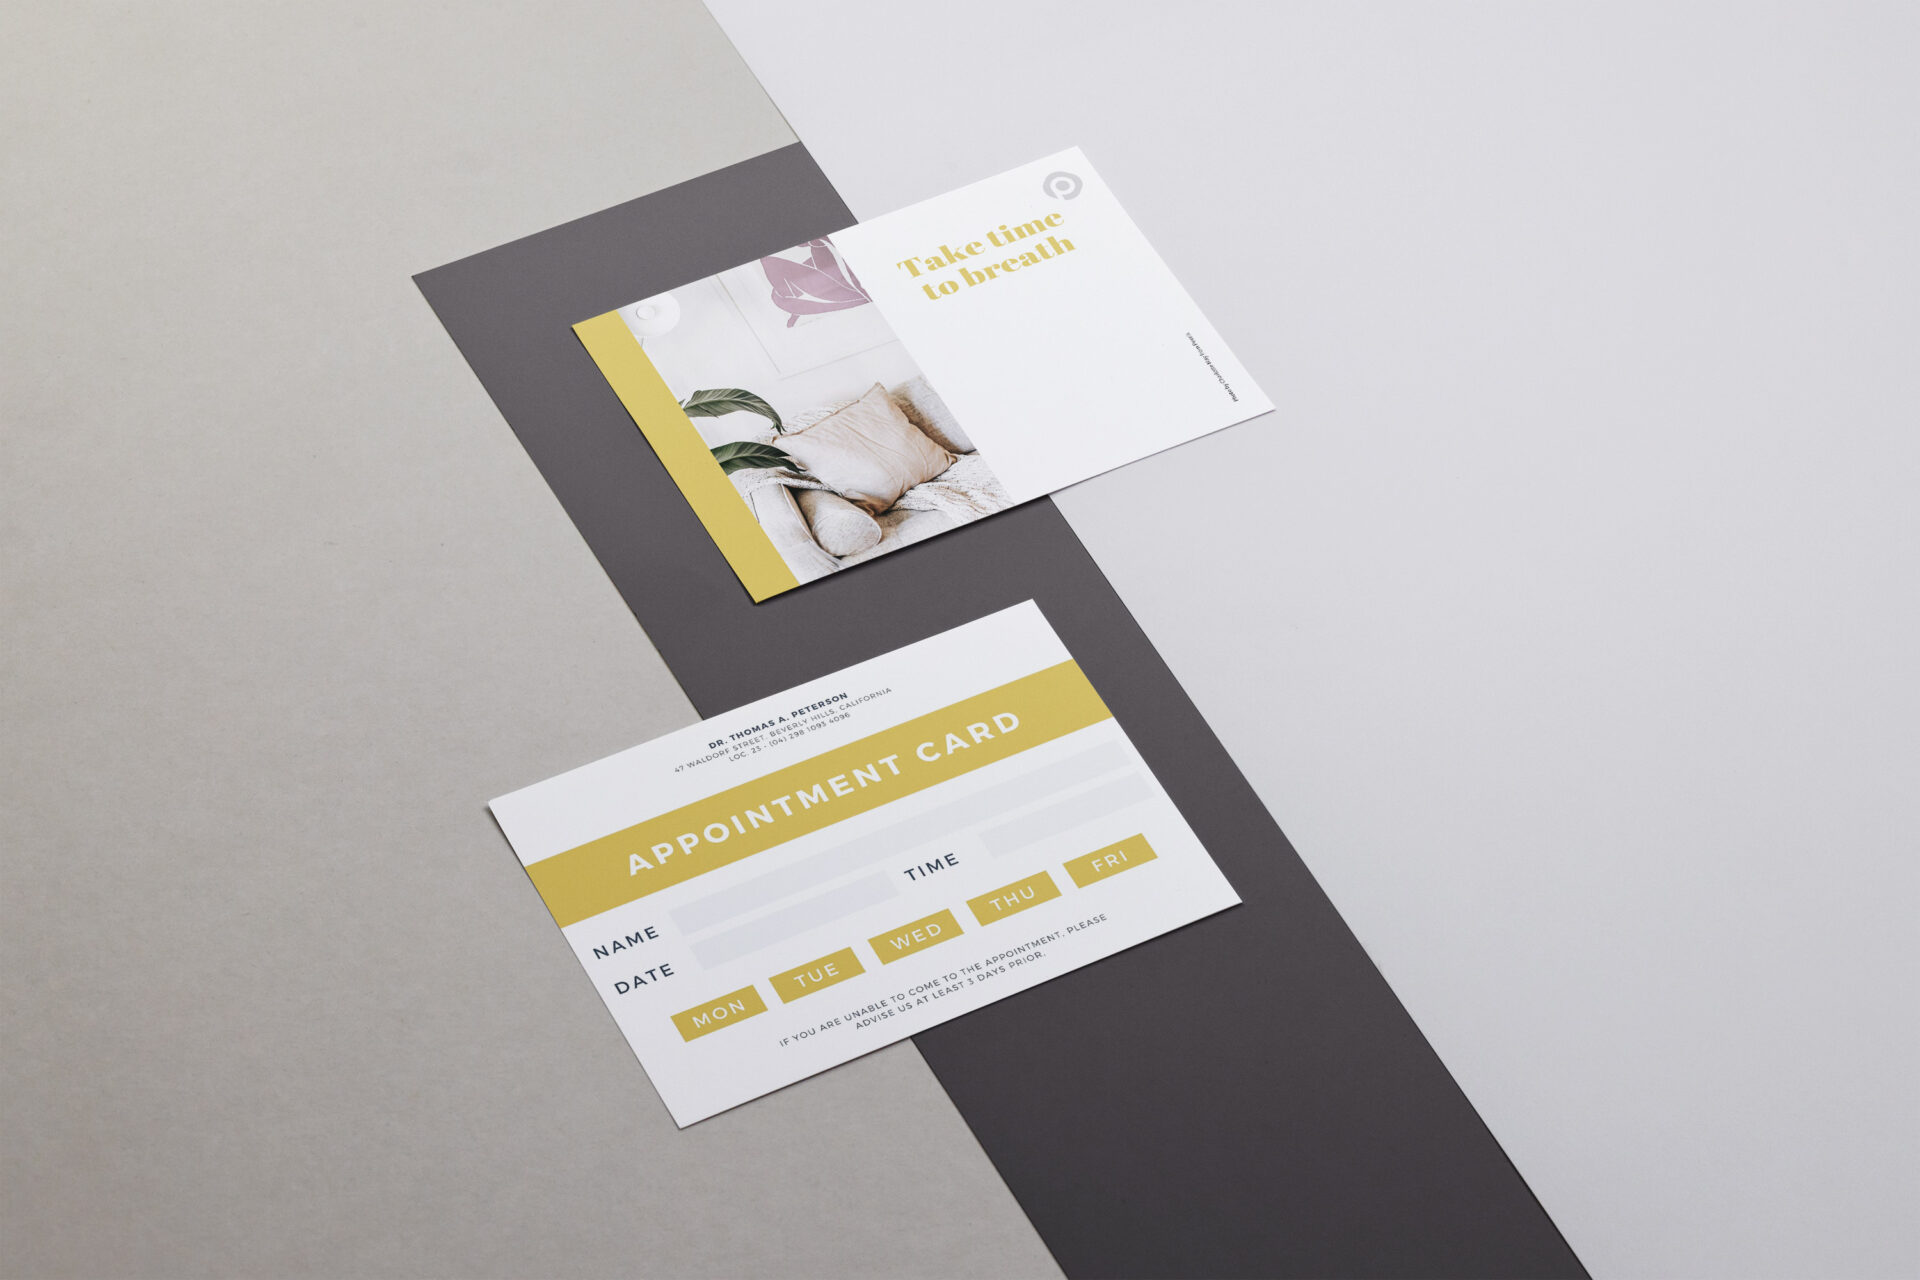 Appointment cards in Vilnius - Print with Pagerr